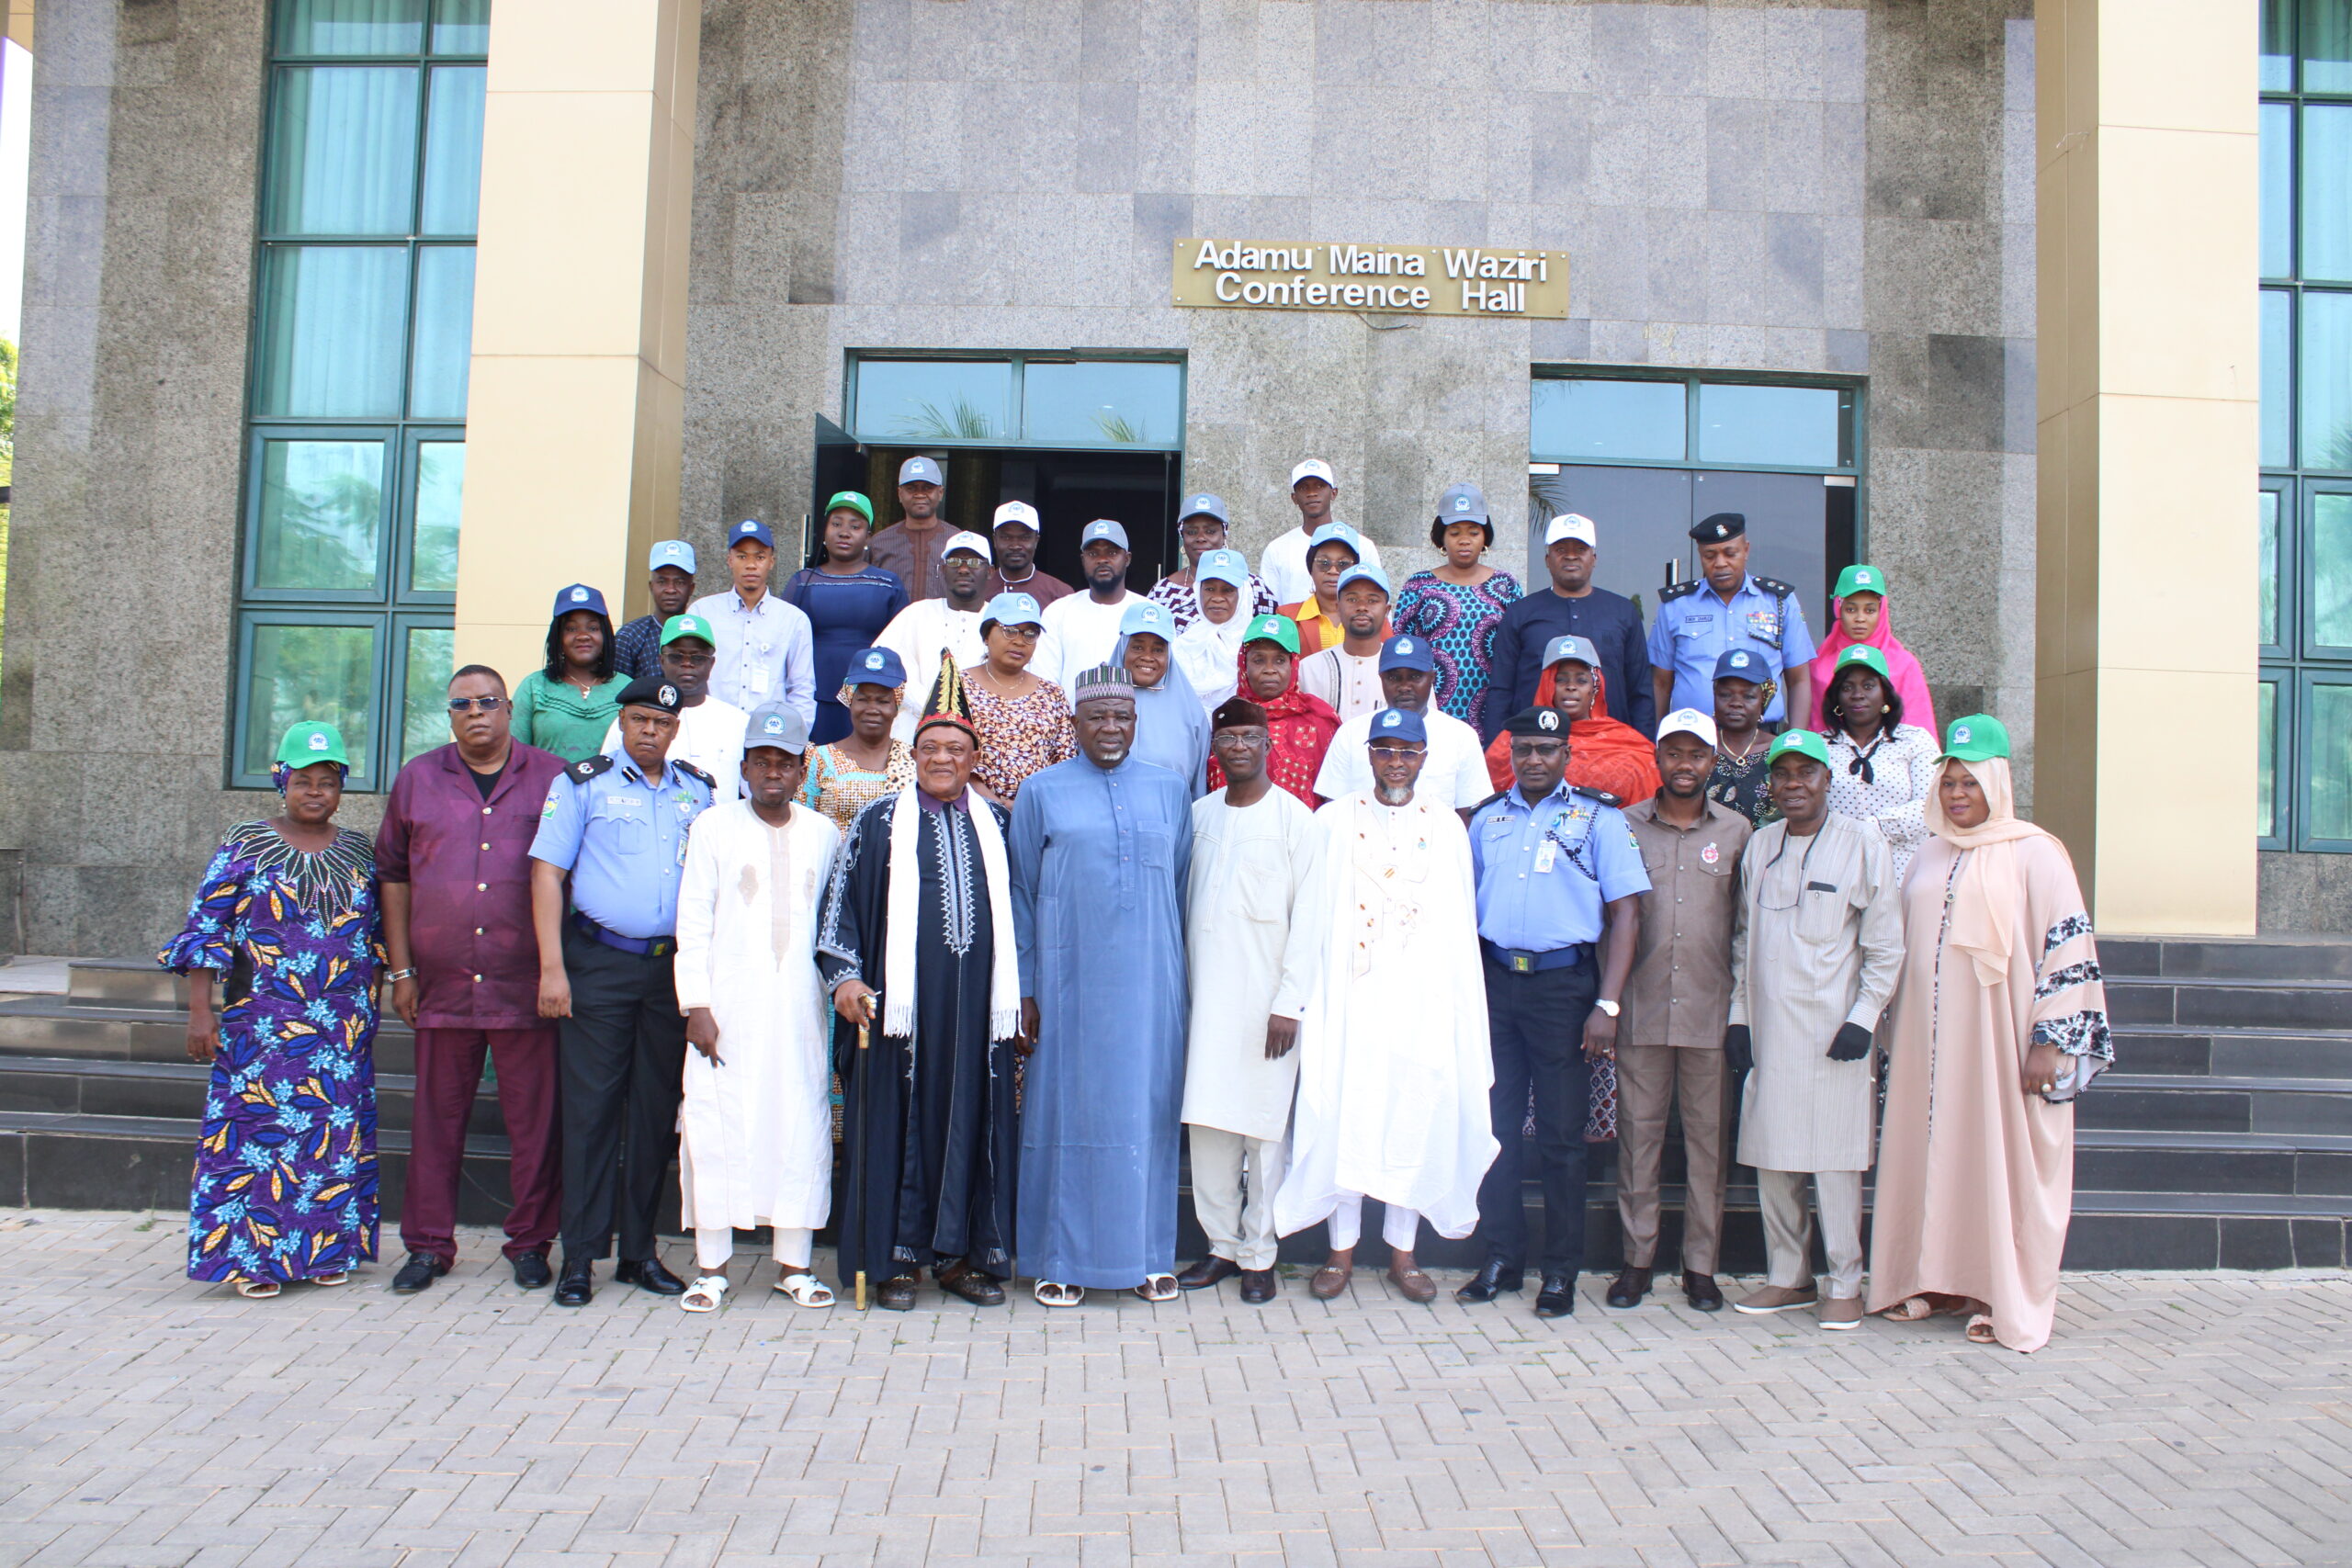 WORKSHOP ON SENSITIZATION AND CAPACITY STRENGTHENING ON THE VIOLENCE PREVENTION CAMPAIGN TOWARDS NIGERIA’S 2023 GENERAL ELECTION